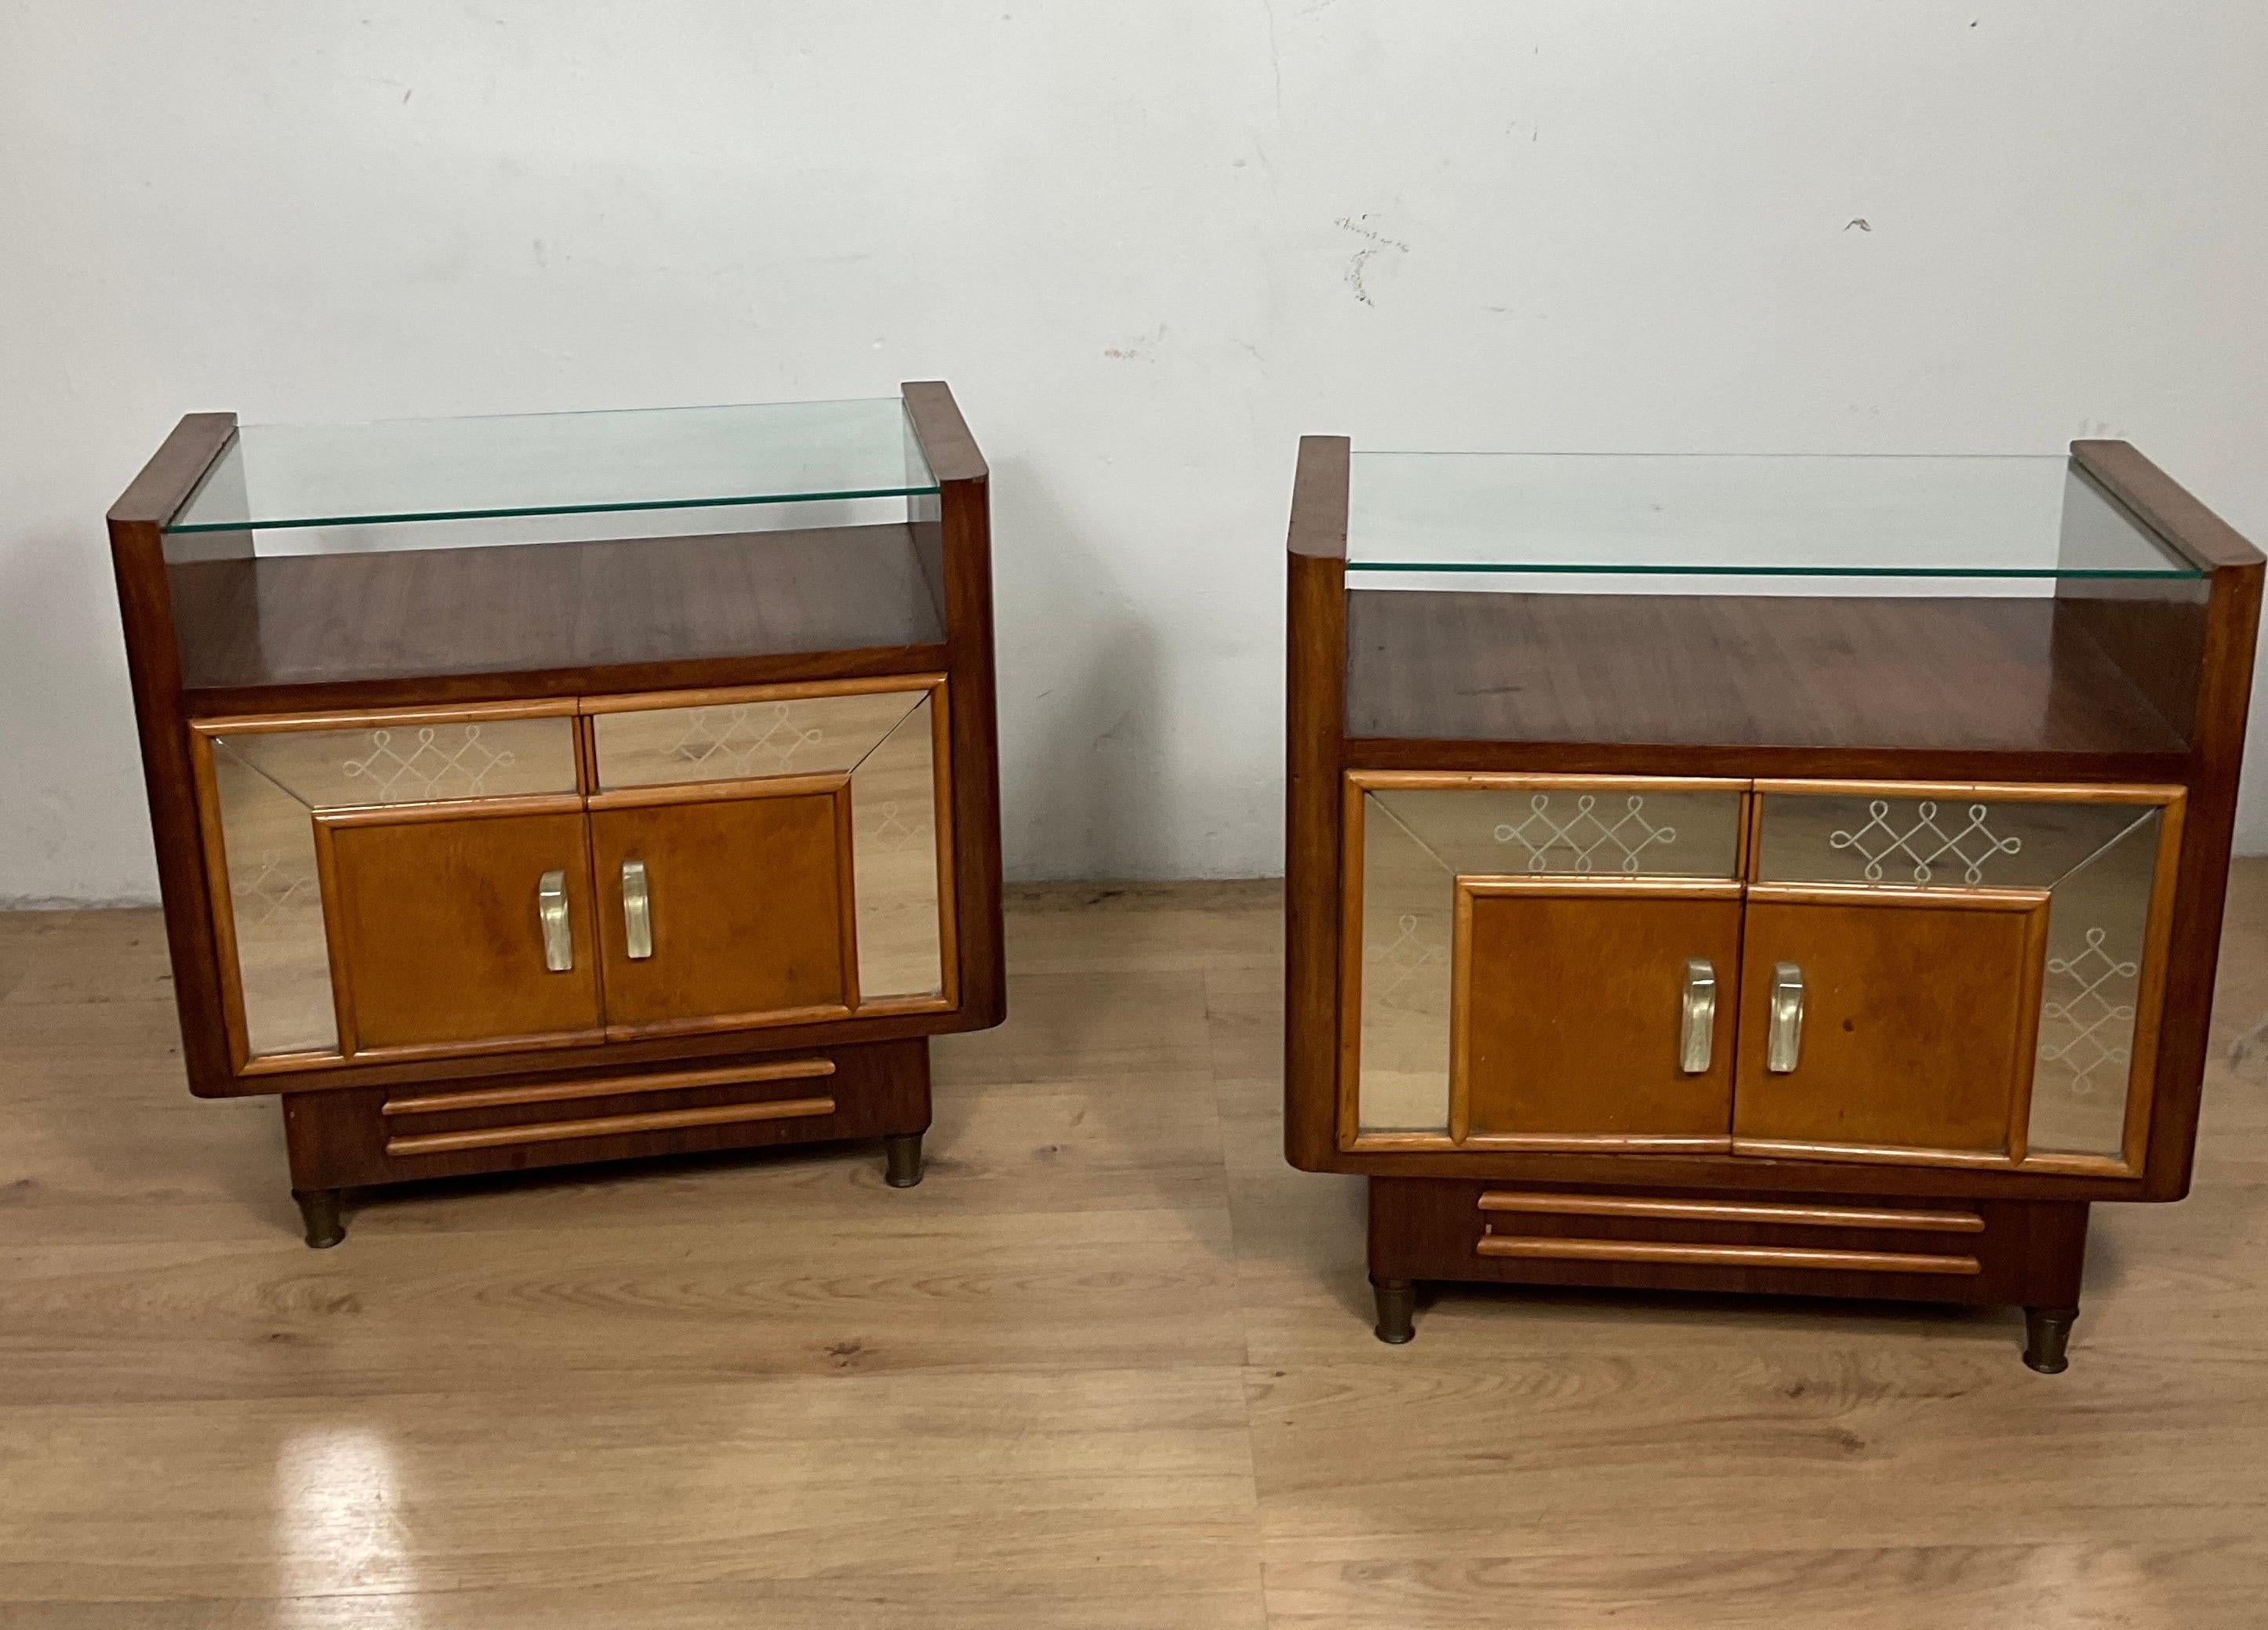 LUIGI BRUSOTTI  Production Italy 1940 ca. Pair of bedside tables in walnut and maple wood, on the front a compartment closed by two hinged doors decorated with mirrored crystal and engraved with geometric patterns, an open compartment with